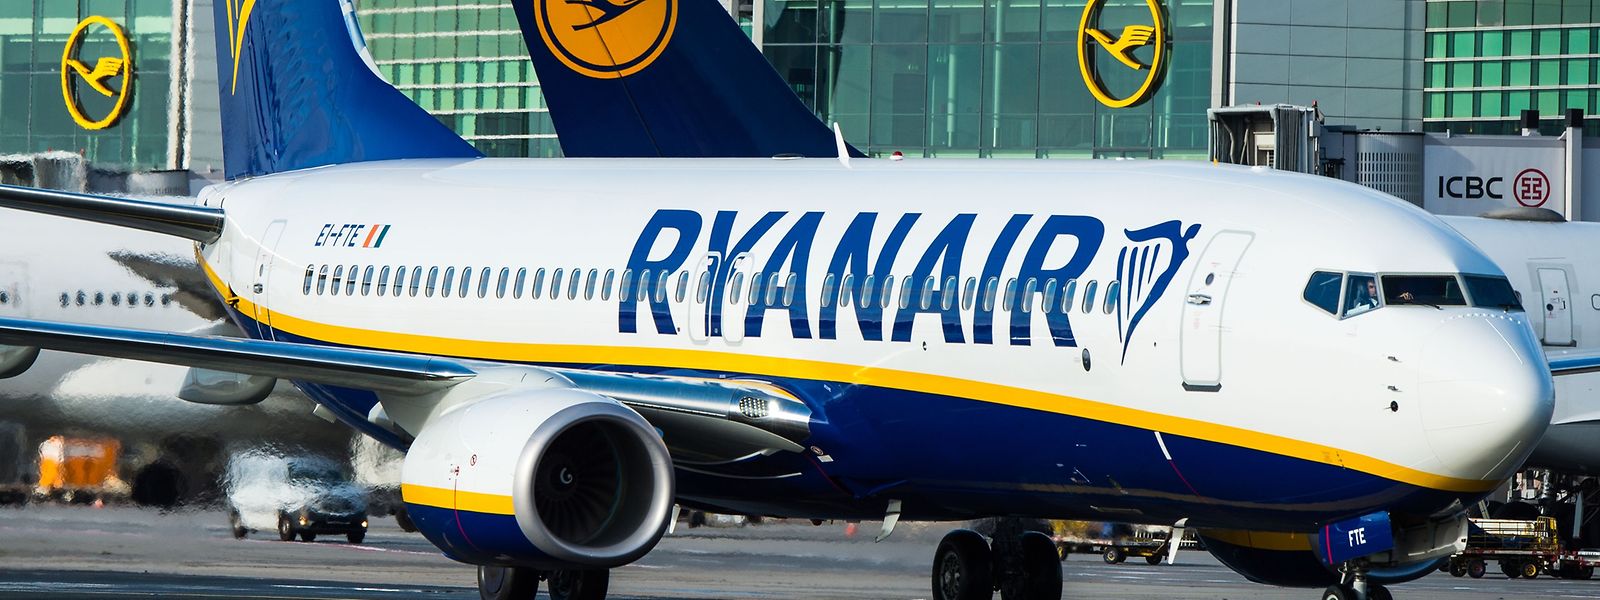 (FILES) This file photo taken on November 02, 2016 shows 
A plane of Irish low-cost airline Ryanair stands in front of an airplane of German airline Lufthansa in Frankfurt am Main, western Germany.
Ryanair announced September 15, 2017, it was cancelling between 1,680 and 2,100 flights over the next six weeks in a bid to "improve punctuality", sparking outrage from passengers who suddenly have to make new travel plans. / AFP PHOTO / dpa / Andreas Arnold / Germany OUT